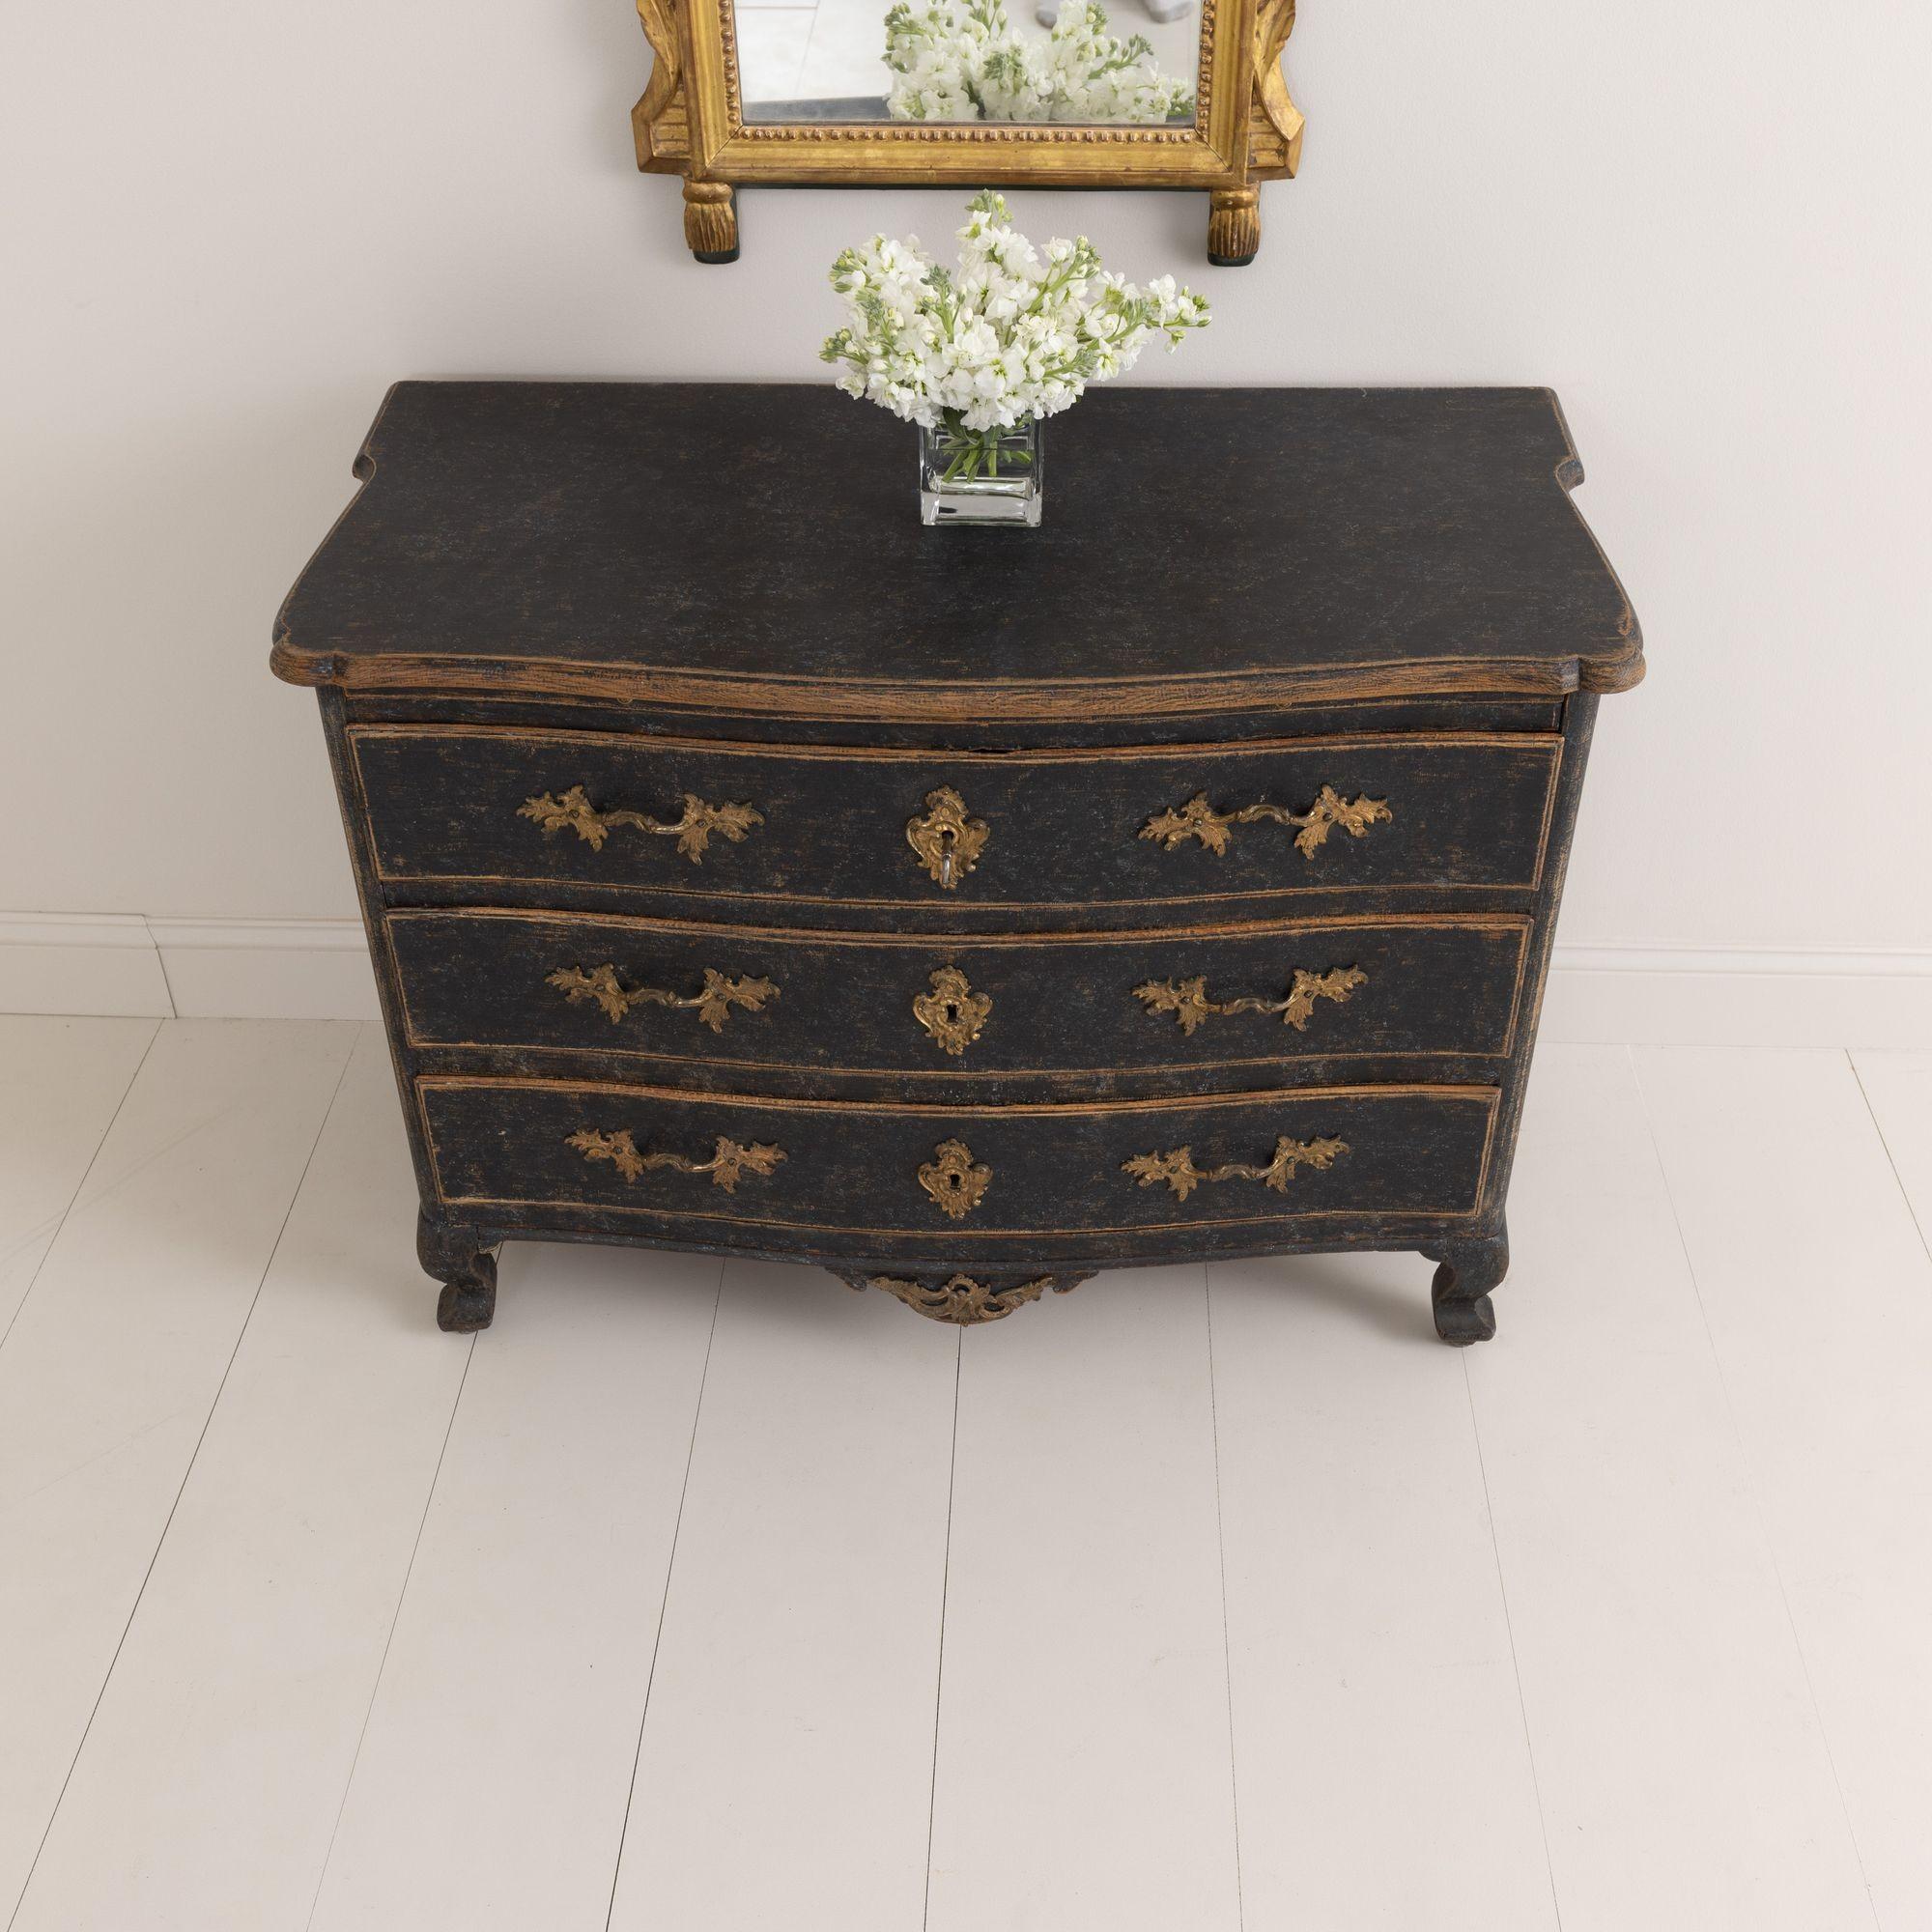 18th C. Swedish Rococo Period Black Painted Commode with Original Brass Hardware For Sale 10